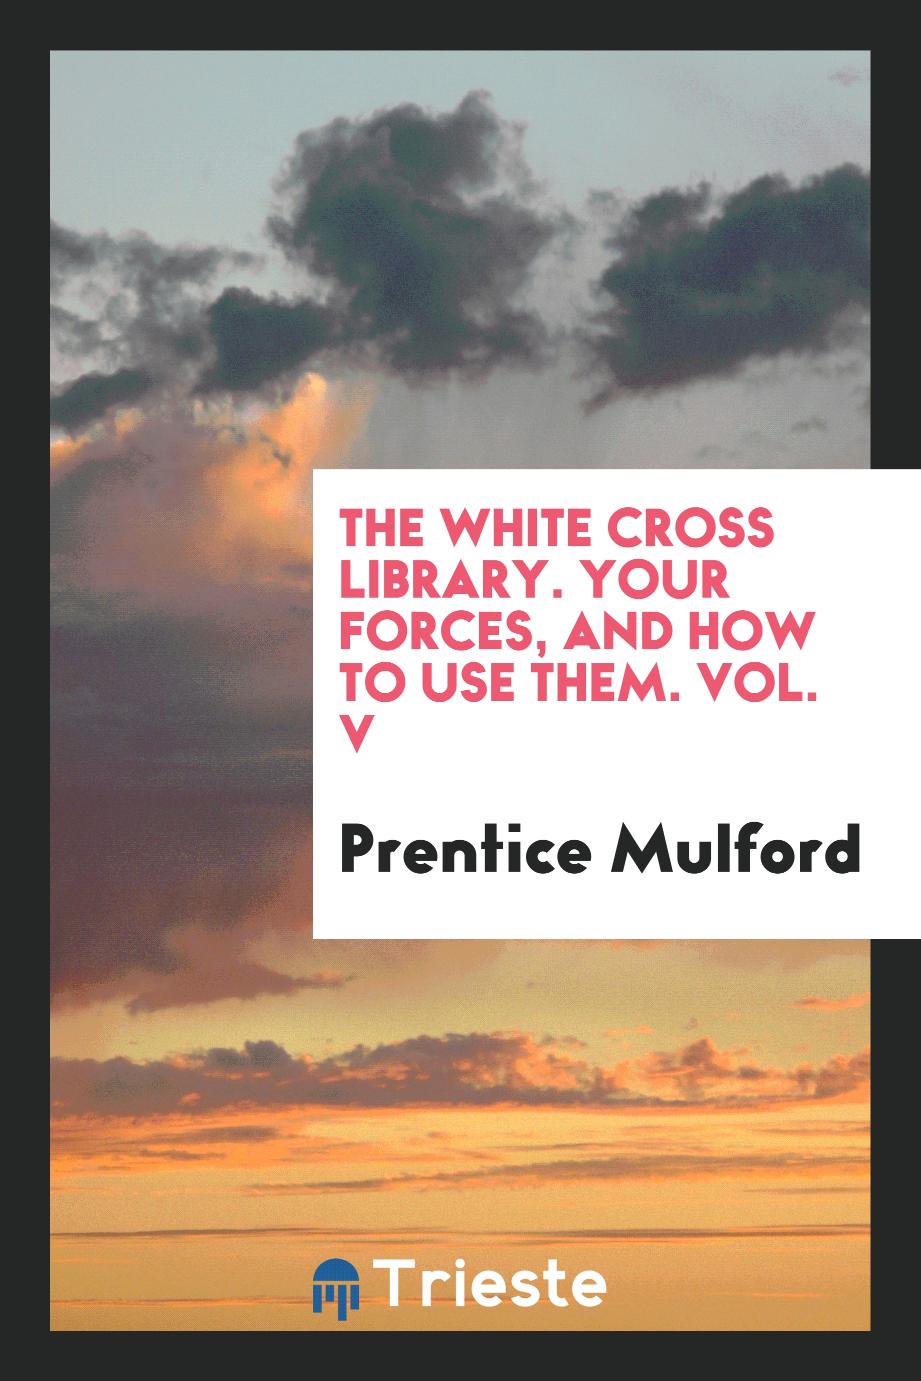 The White Cross Library. Your Forces, and How to Use Them. Vol. V